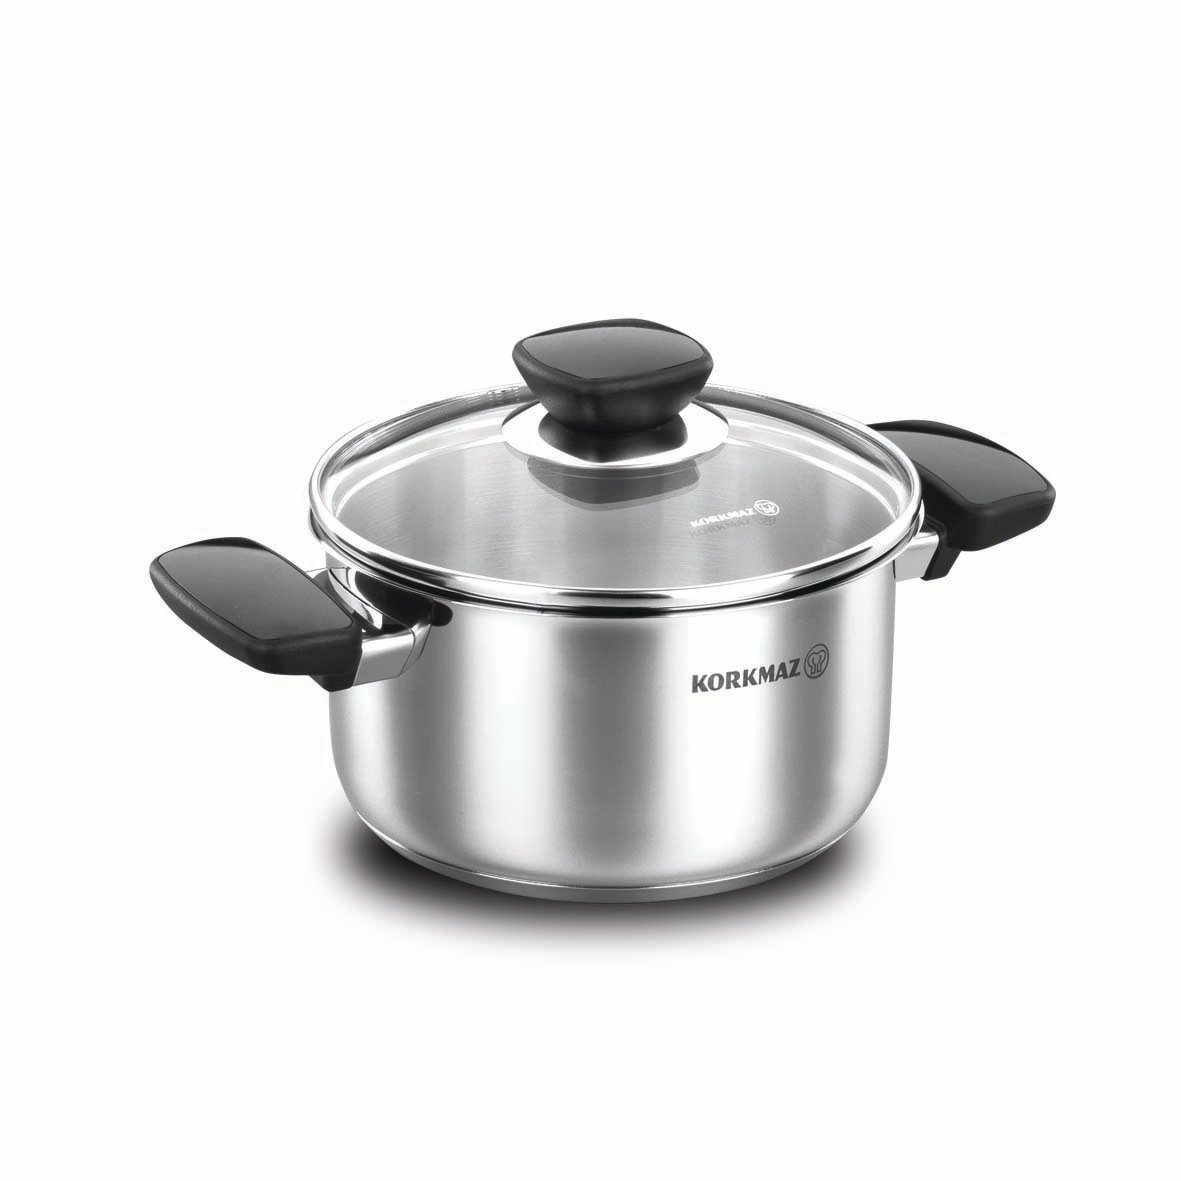 Korkmaz A1686-1 4 Qt. Cookware Casserole 18 By 10 Stainless Steel Sauce Pan With Glass Lid